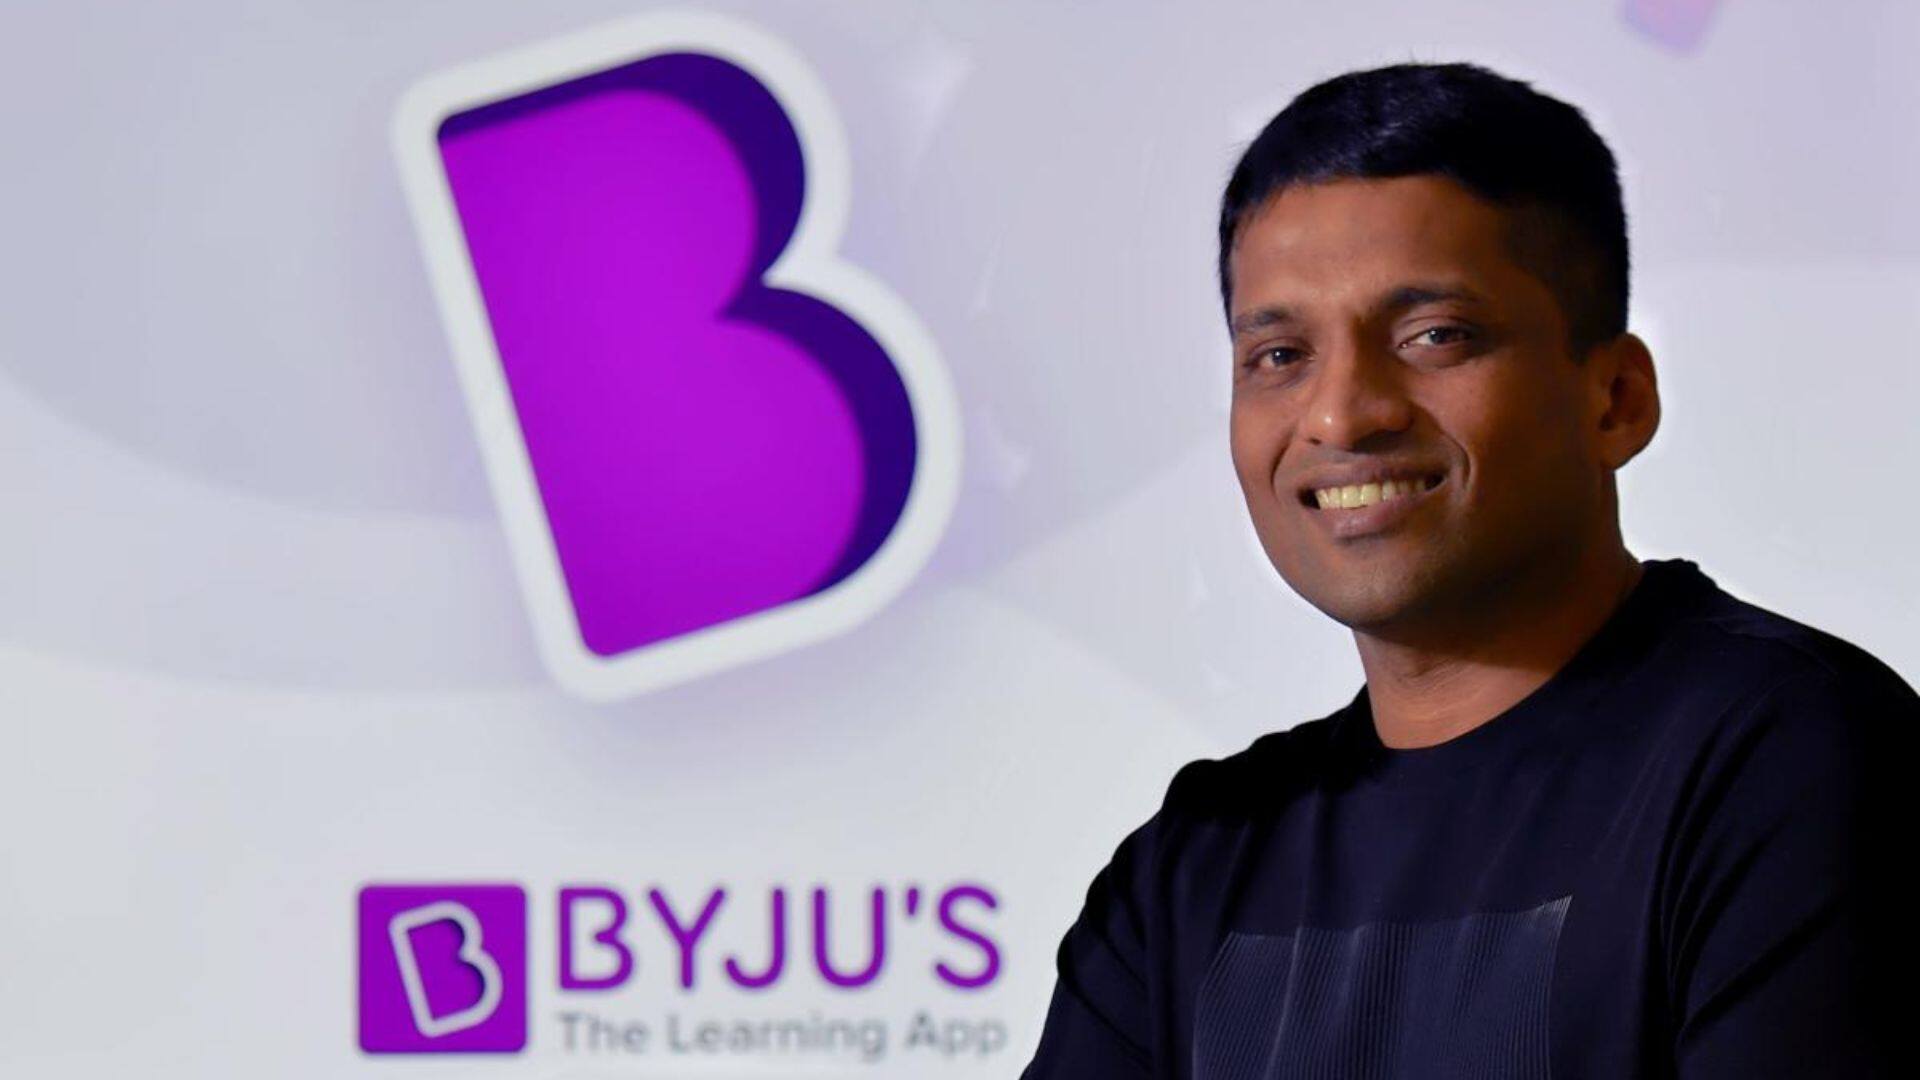 From Billion-Dollar Valuation To Zero: Byju's Plunge Stuns Industry